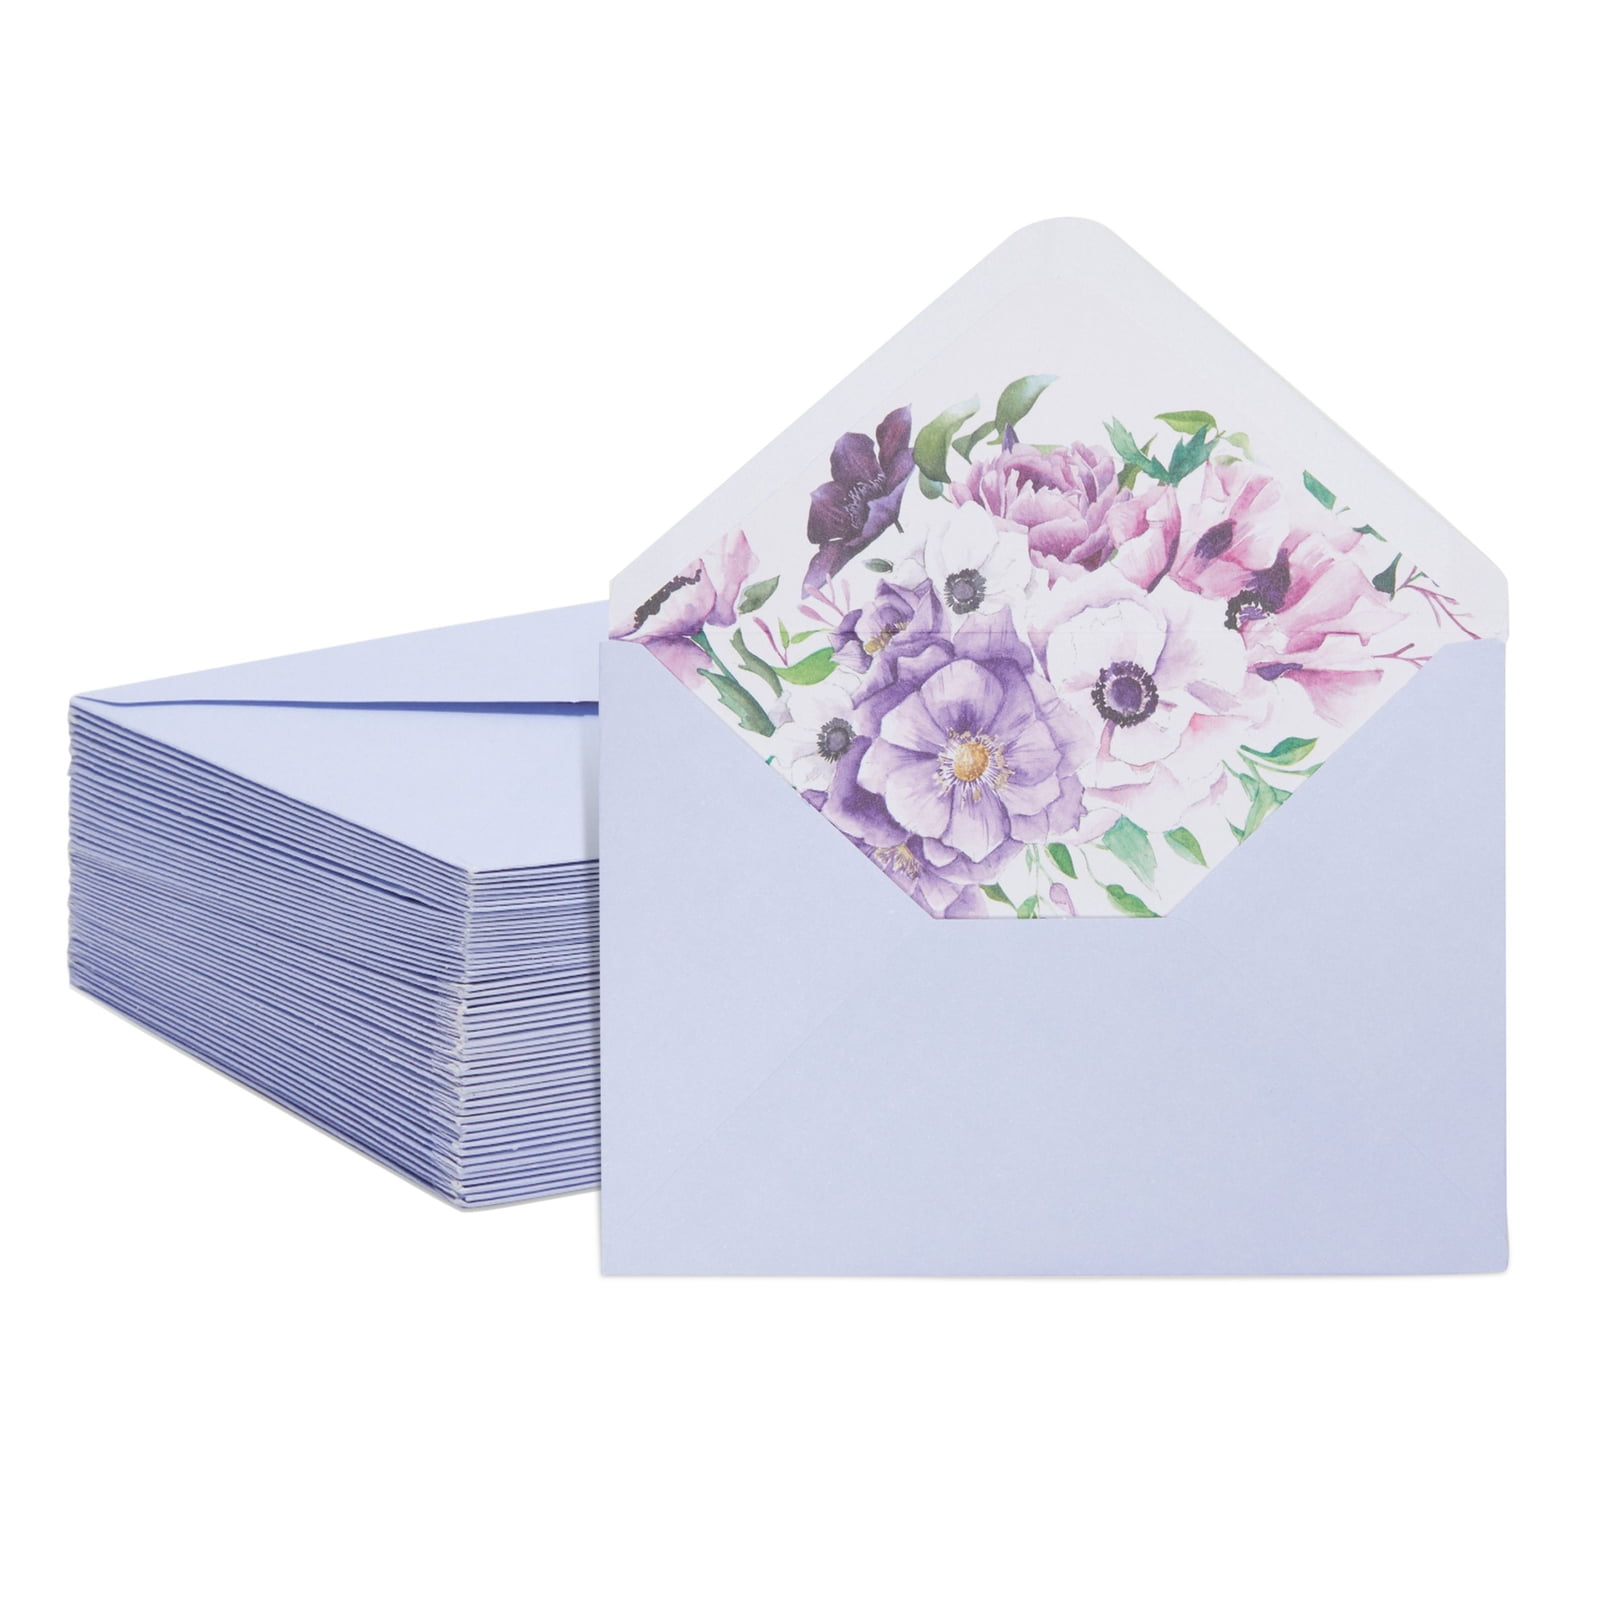 Strathmore Watercolor Cards and envelopes - A1 folded cards - 10 pack